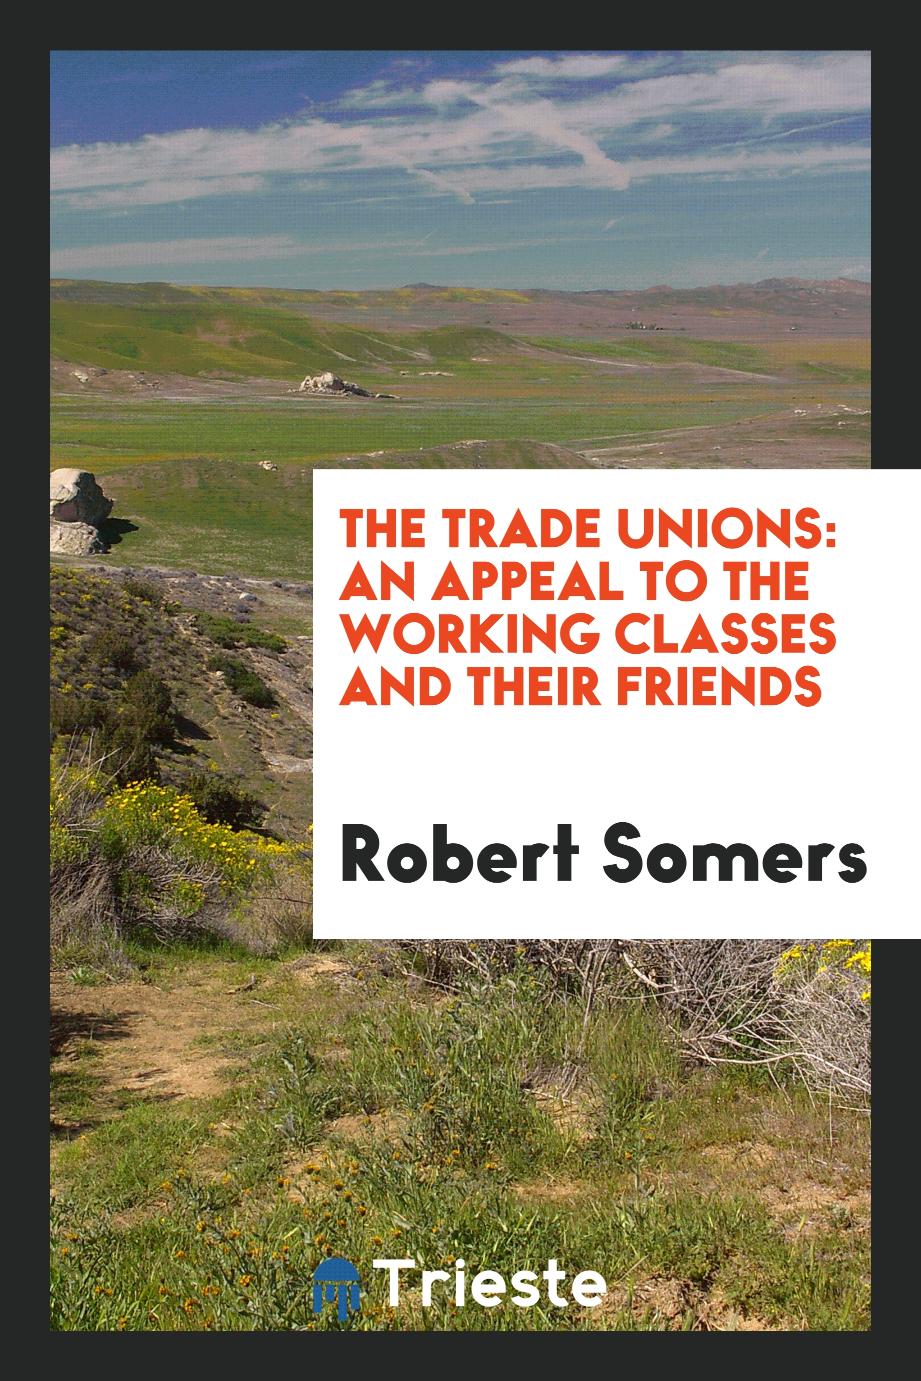 The Trade Unions: An Appeal to the Working Classes and Their Friends